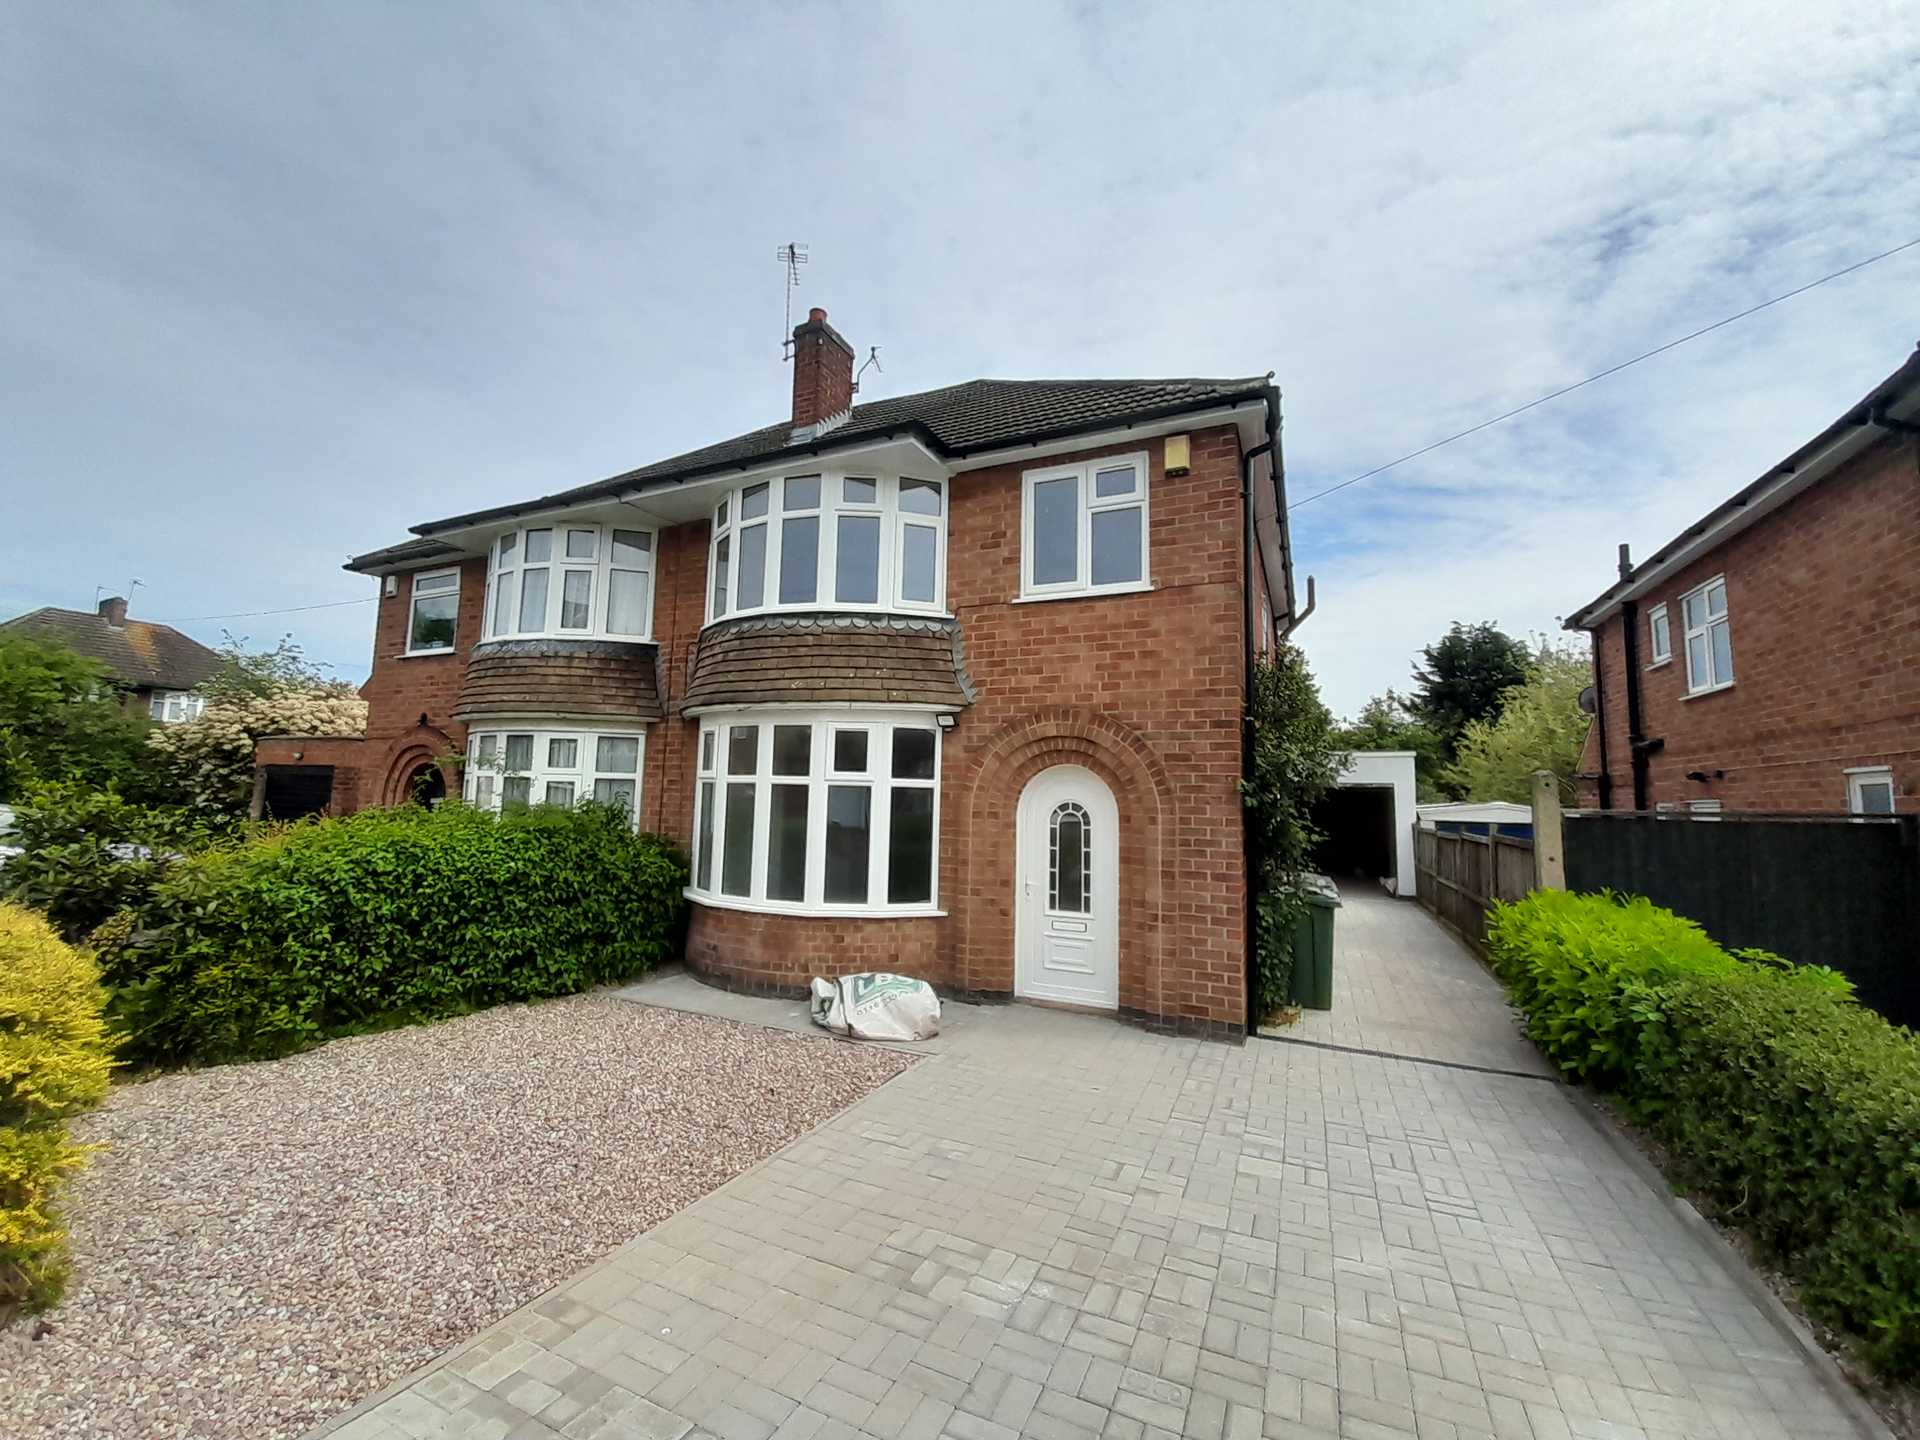 House in Birstall, Leicester 12266723